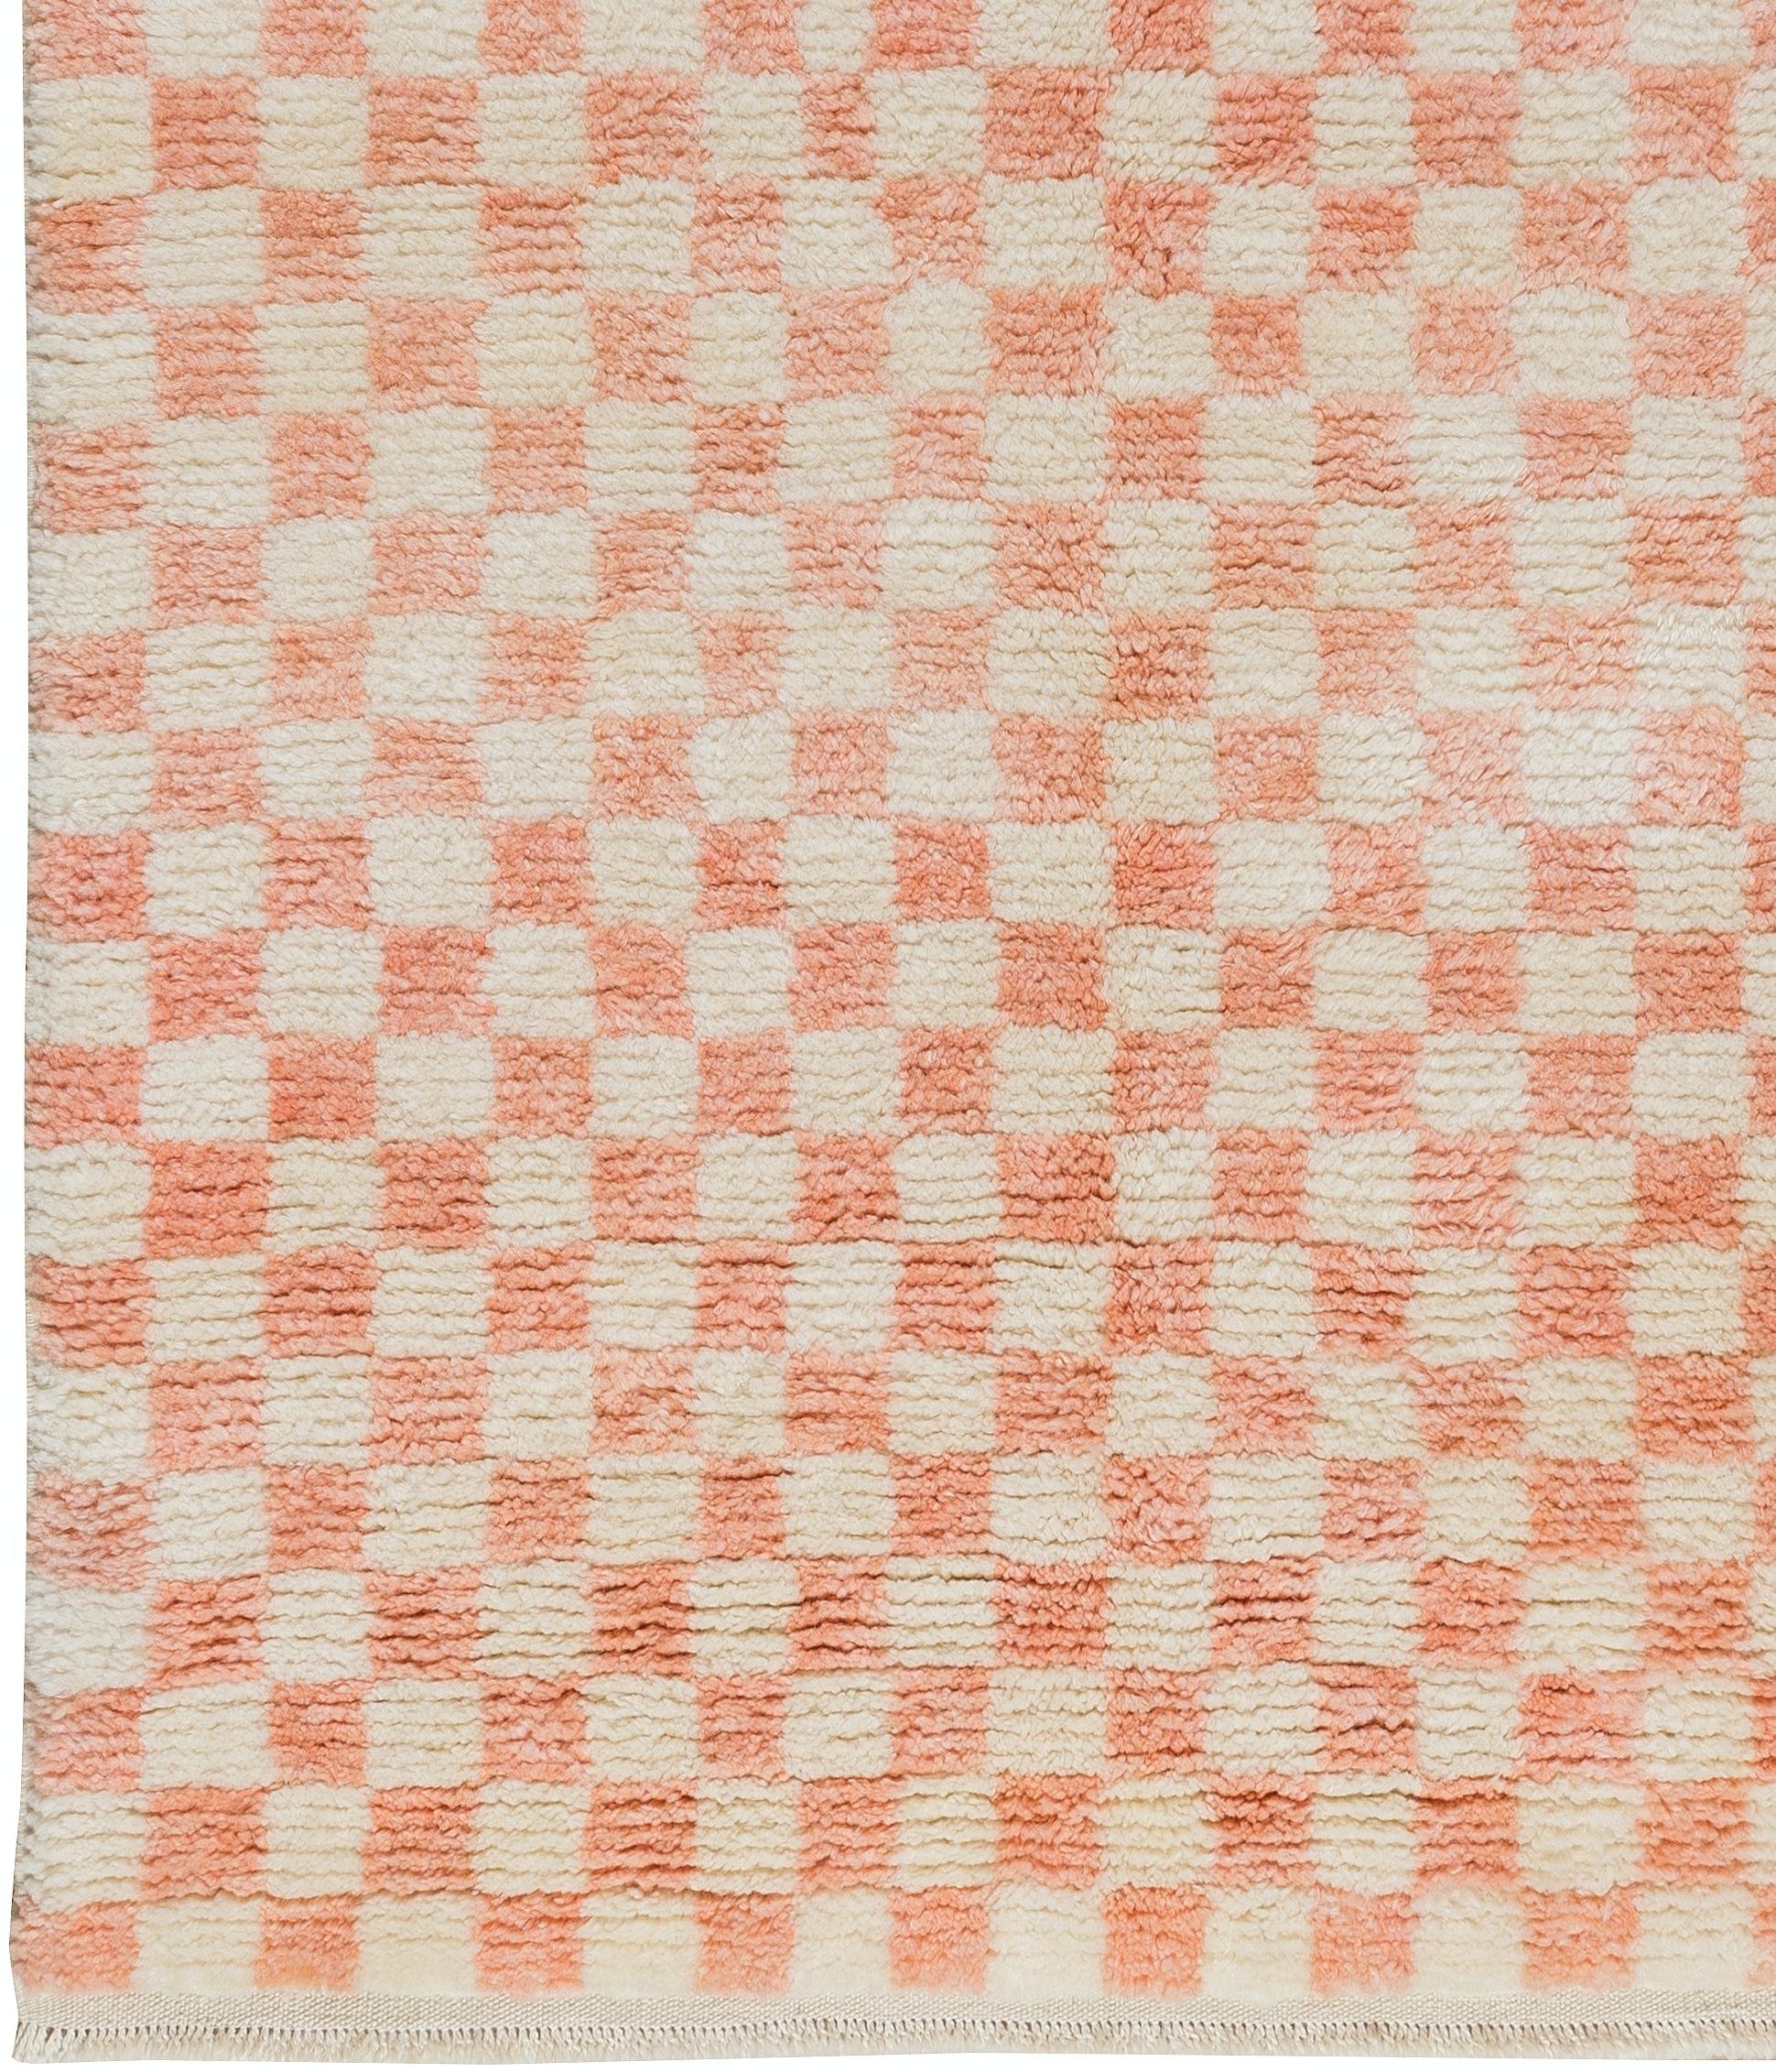 Hand-Knotted 4x6 ft Handmade Checkered Design Tulu Rug in Soft Pink & Beige. 100% Wool For Sale